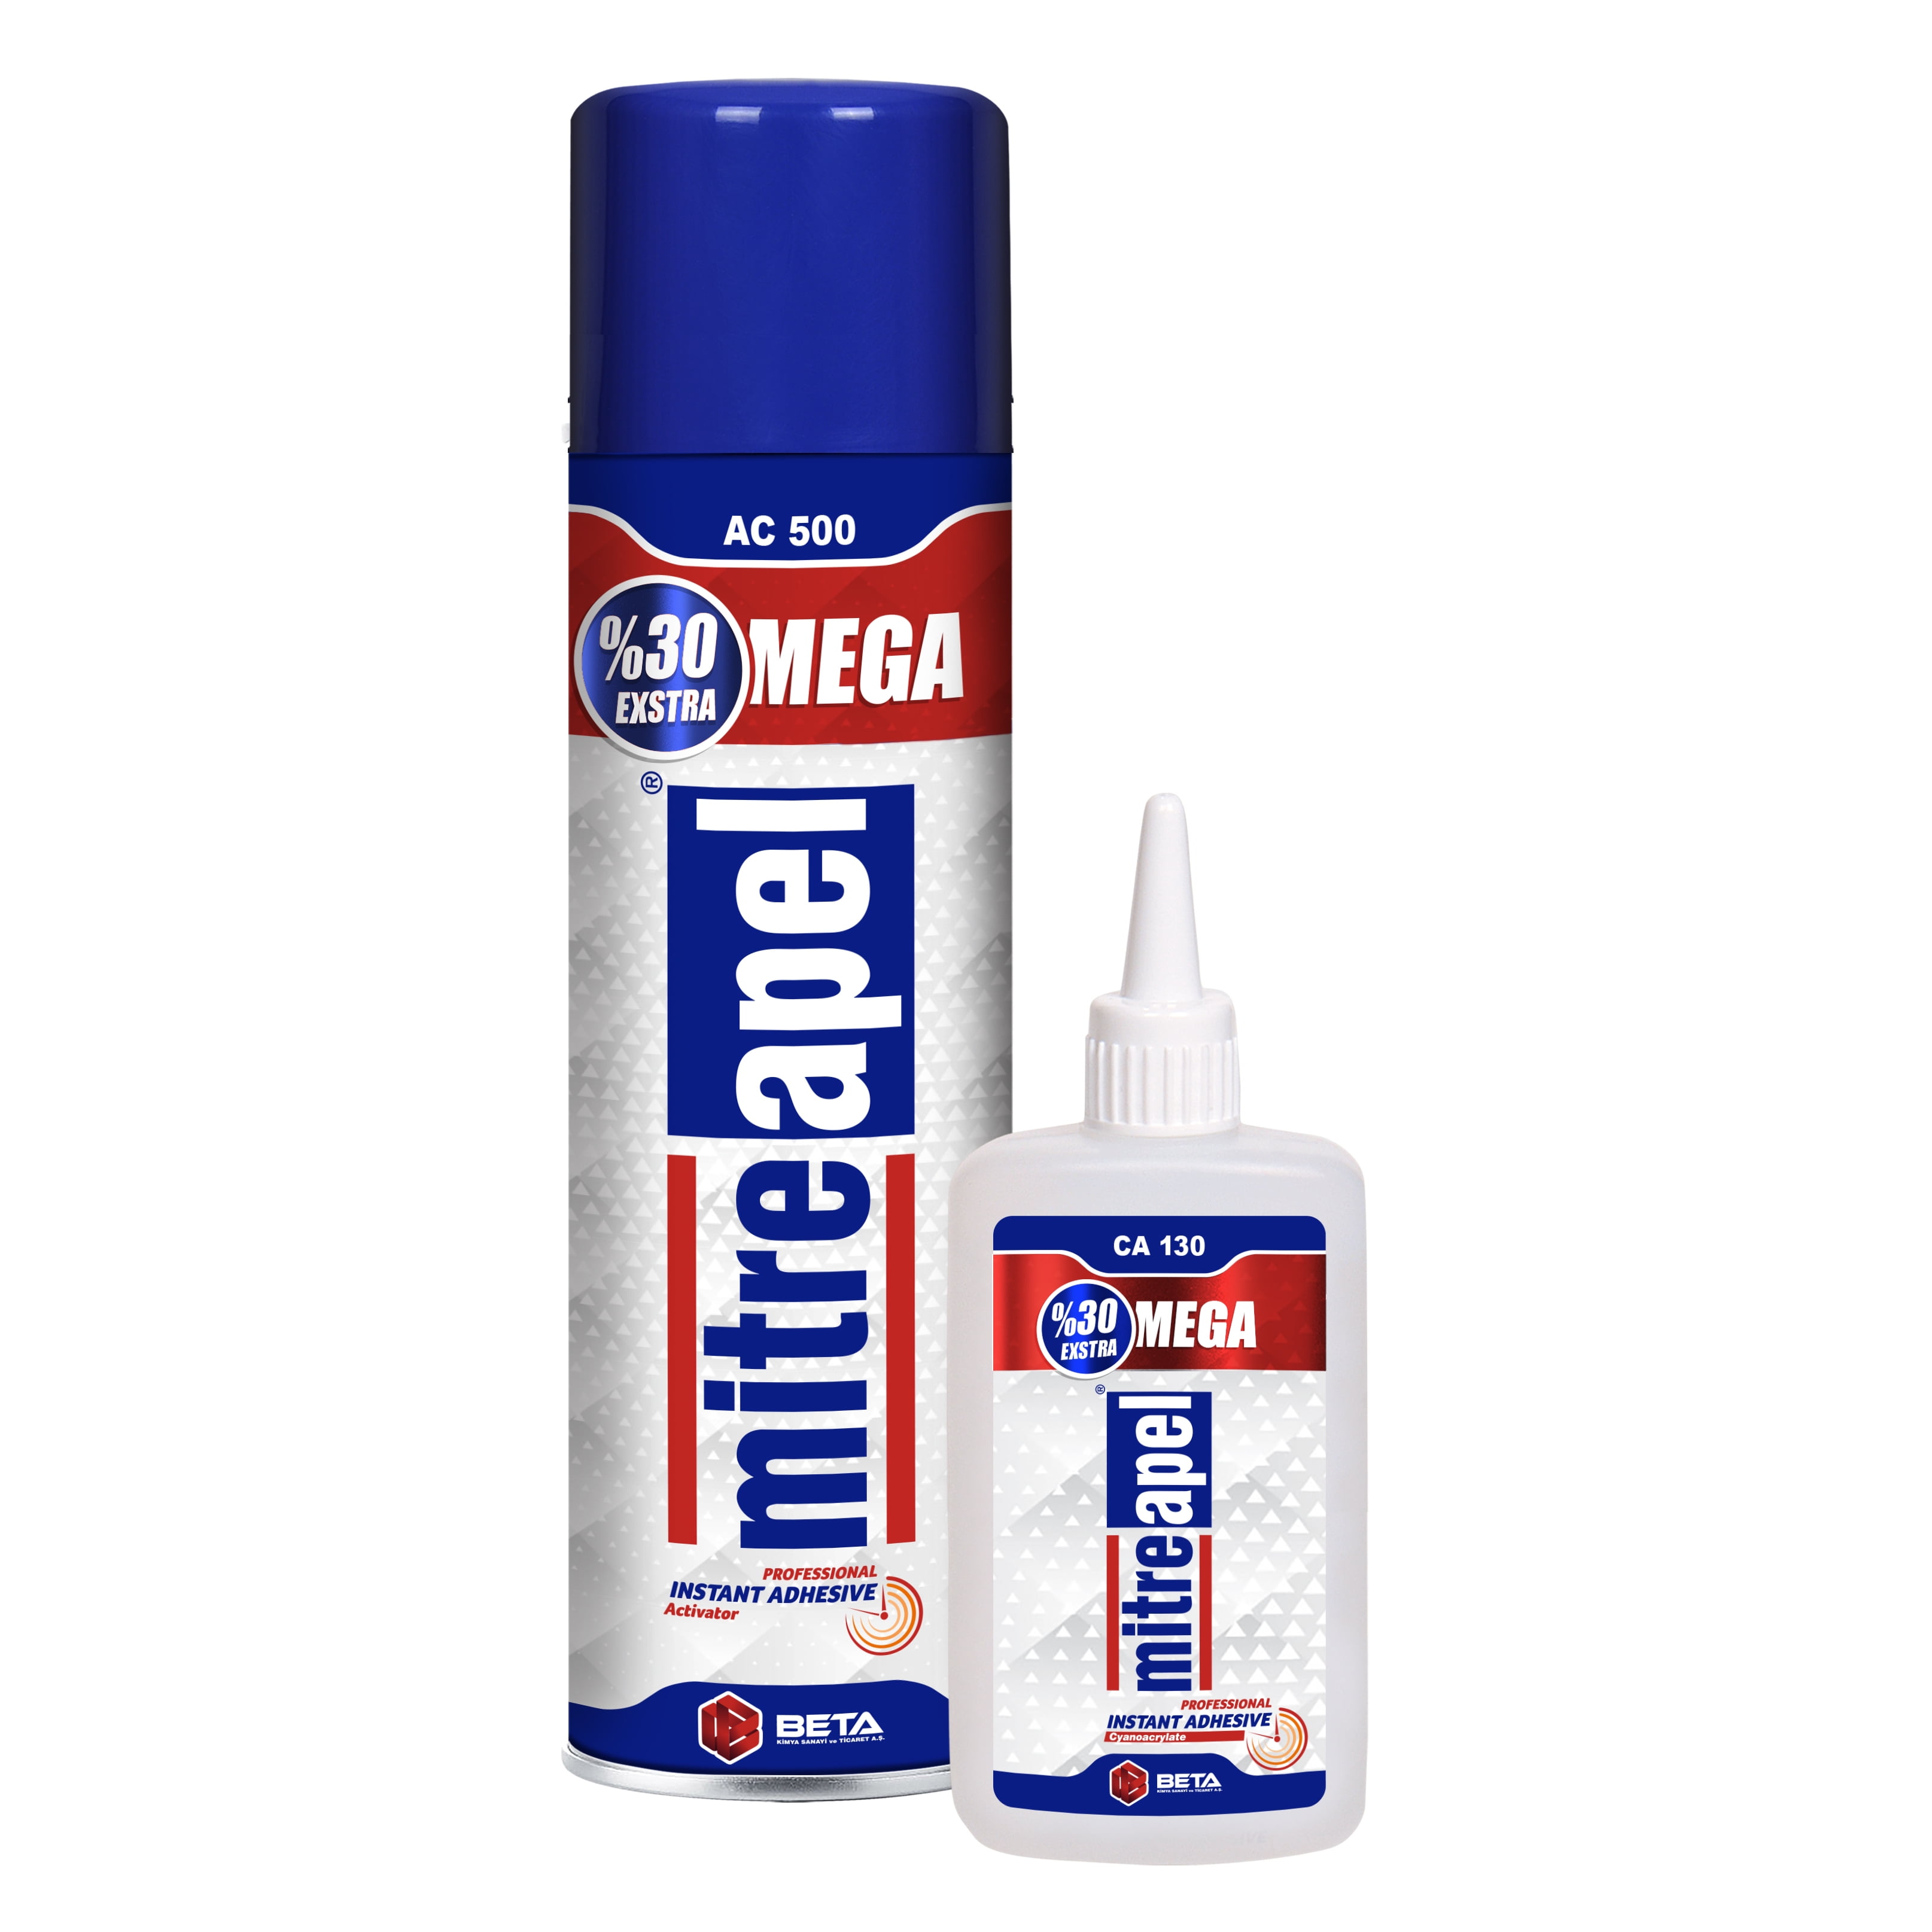  MITREAPEL Super CA Glue (50 x 1.7 oz) with Spray Adhesive  Activator (50x6.7 fl oz) Ca Glue with Activator for Wood, Plastic, Metal,  Leather, Ceramic-Cyanoacrylate Glue for Crafting&Building (50 Pk) 